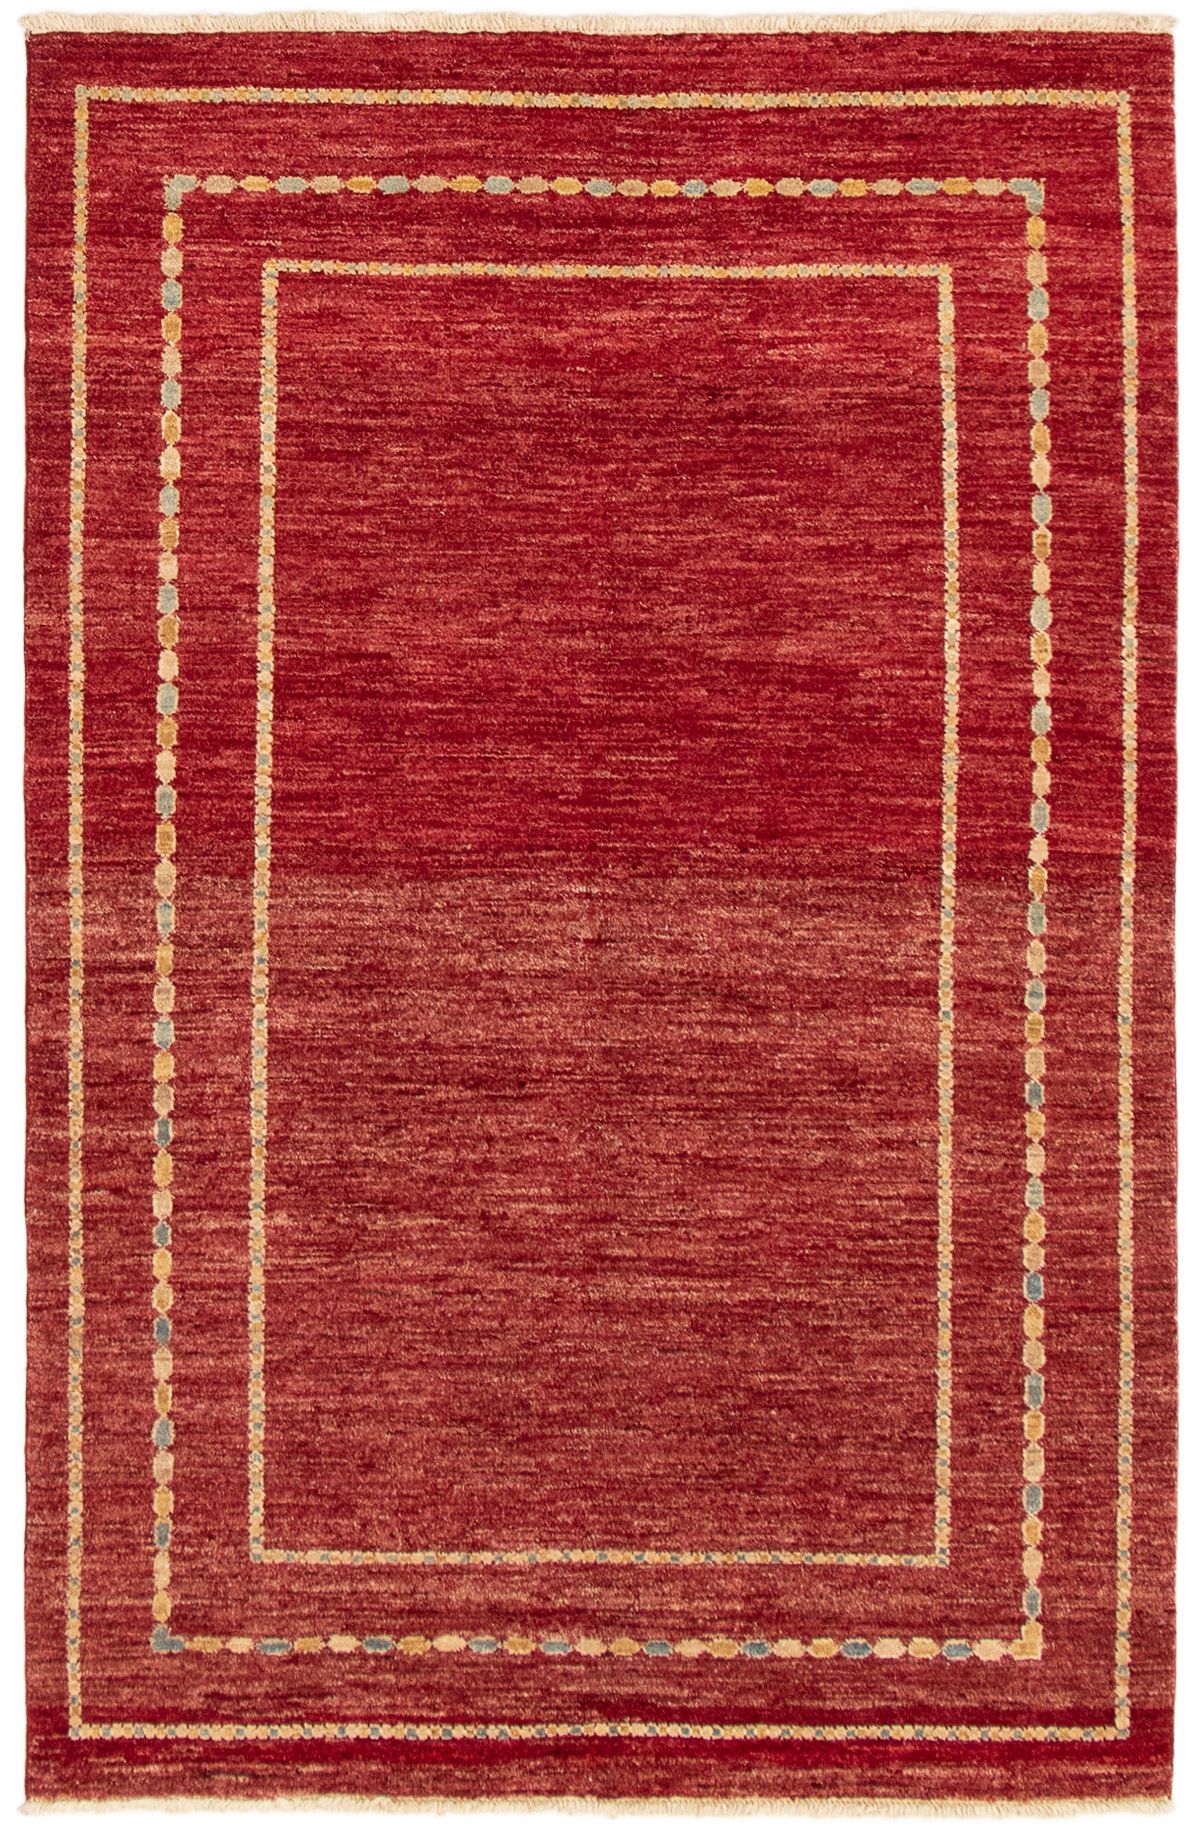 Hand-knotted Finest Ziegler Chobi Red Wool Rug 4'6" x 6'10" Size: 4'6" x 6'10"  